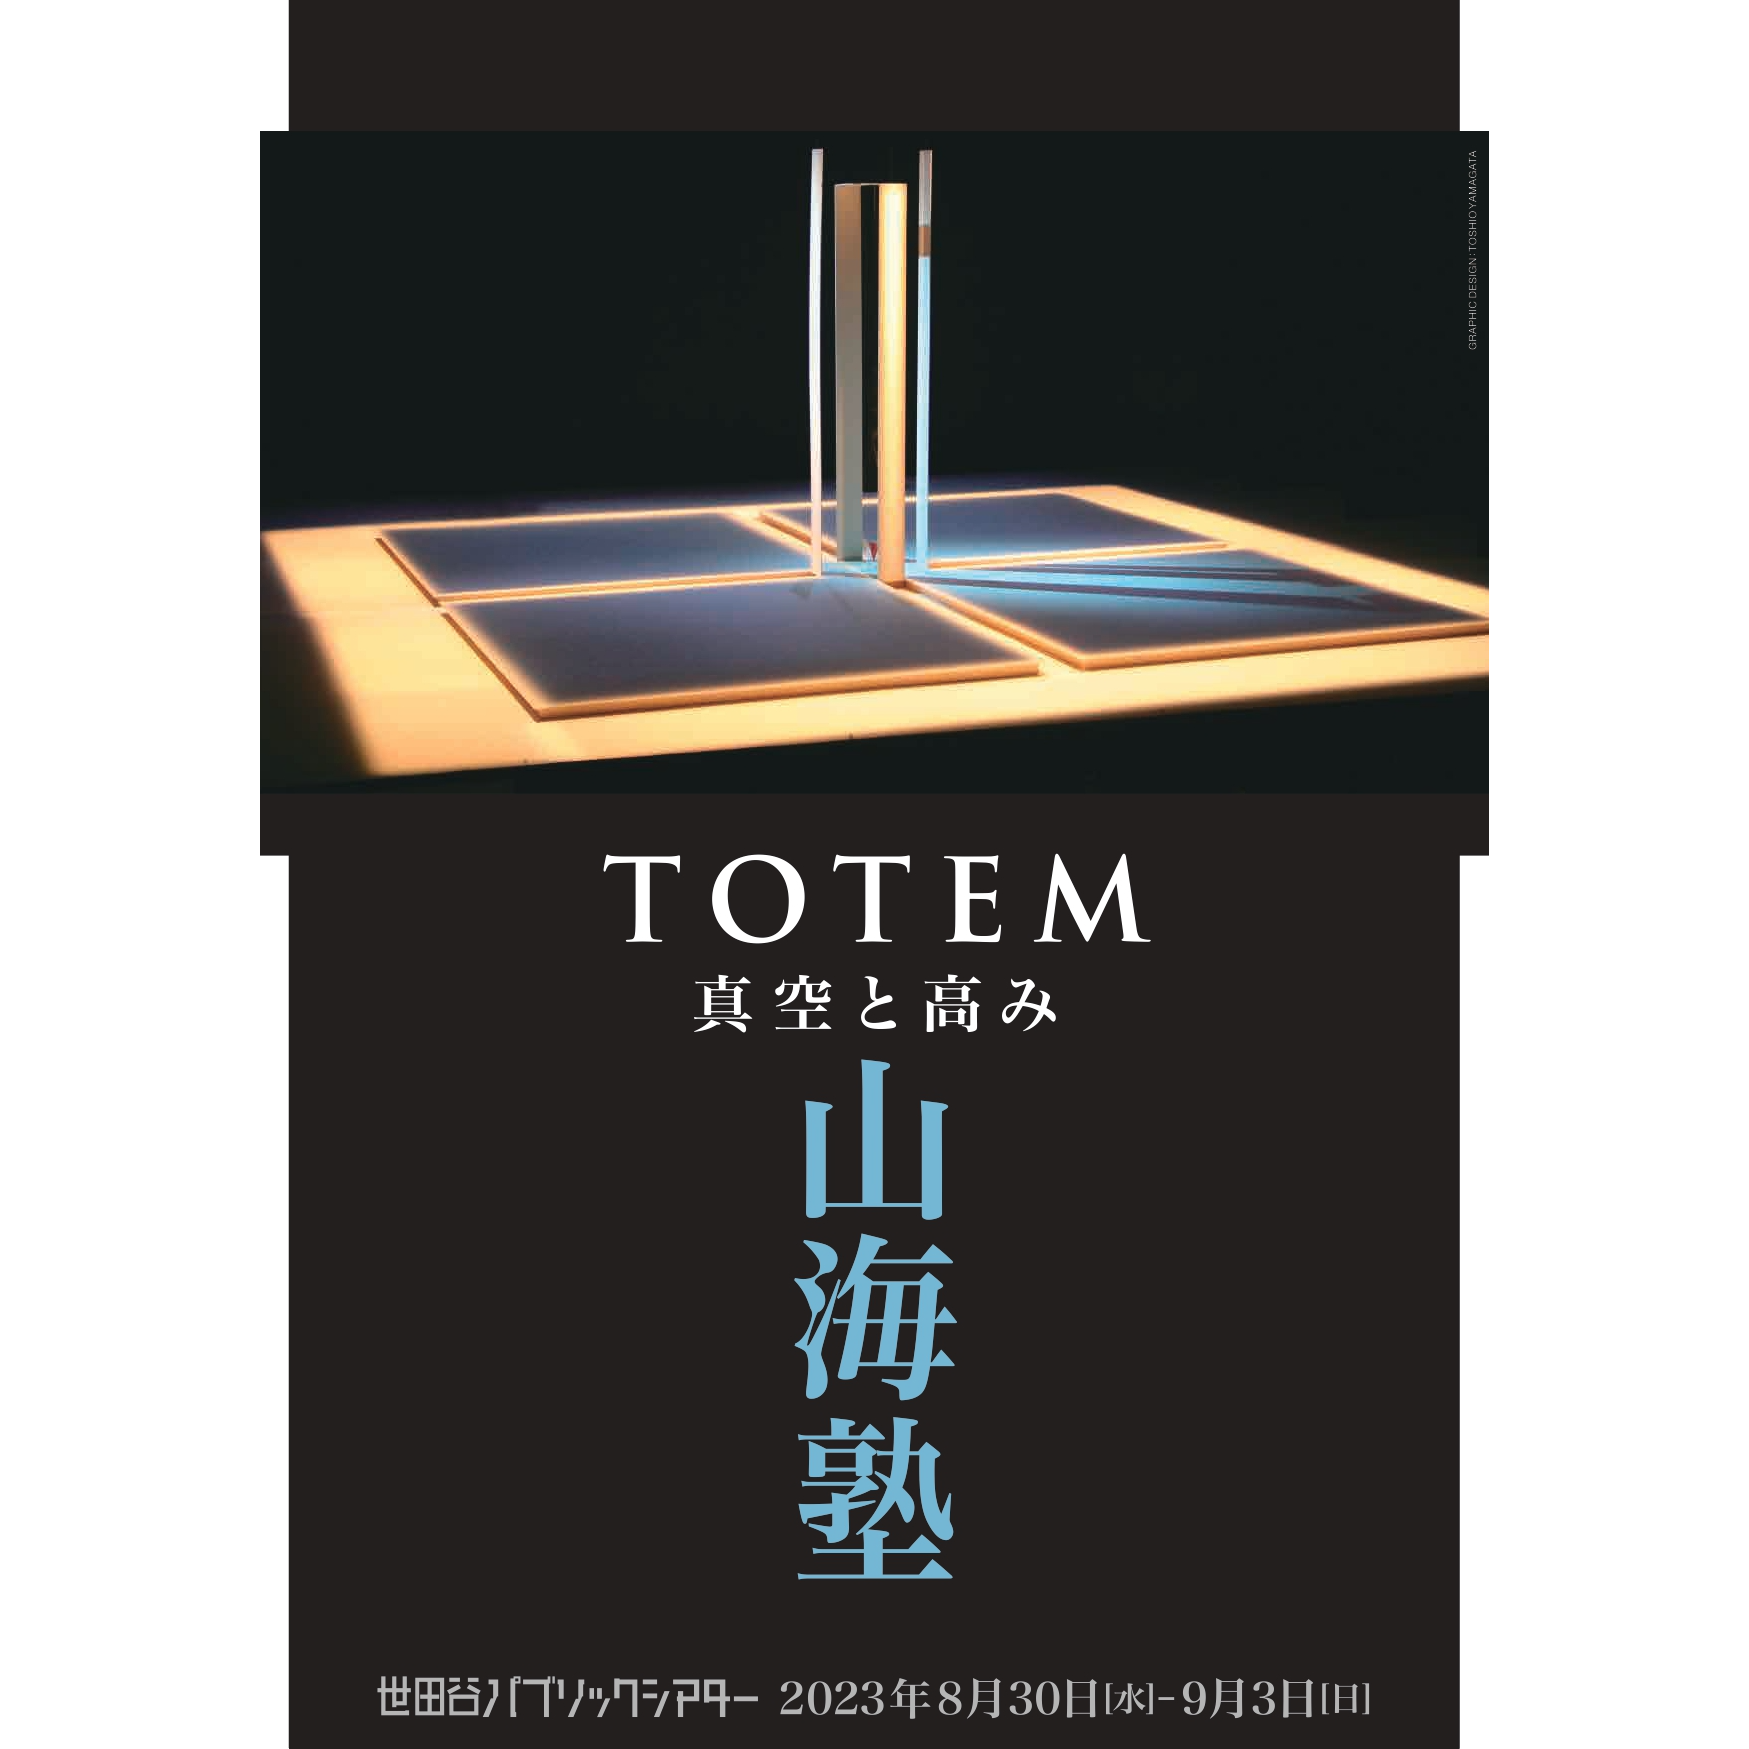 "TOTEM vacuum and height"